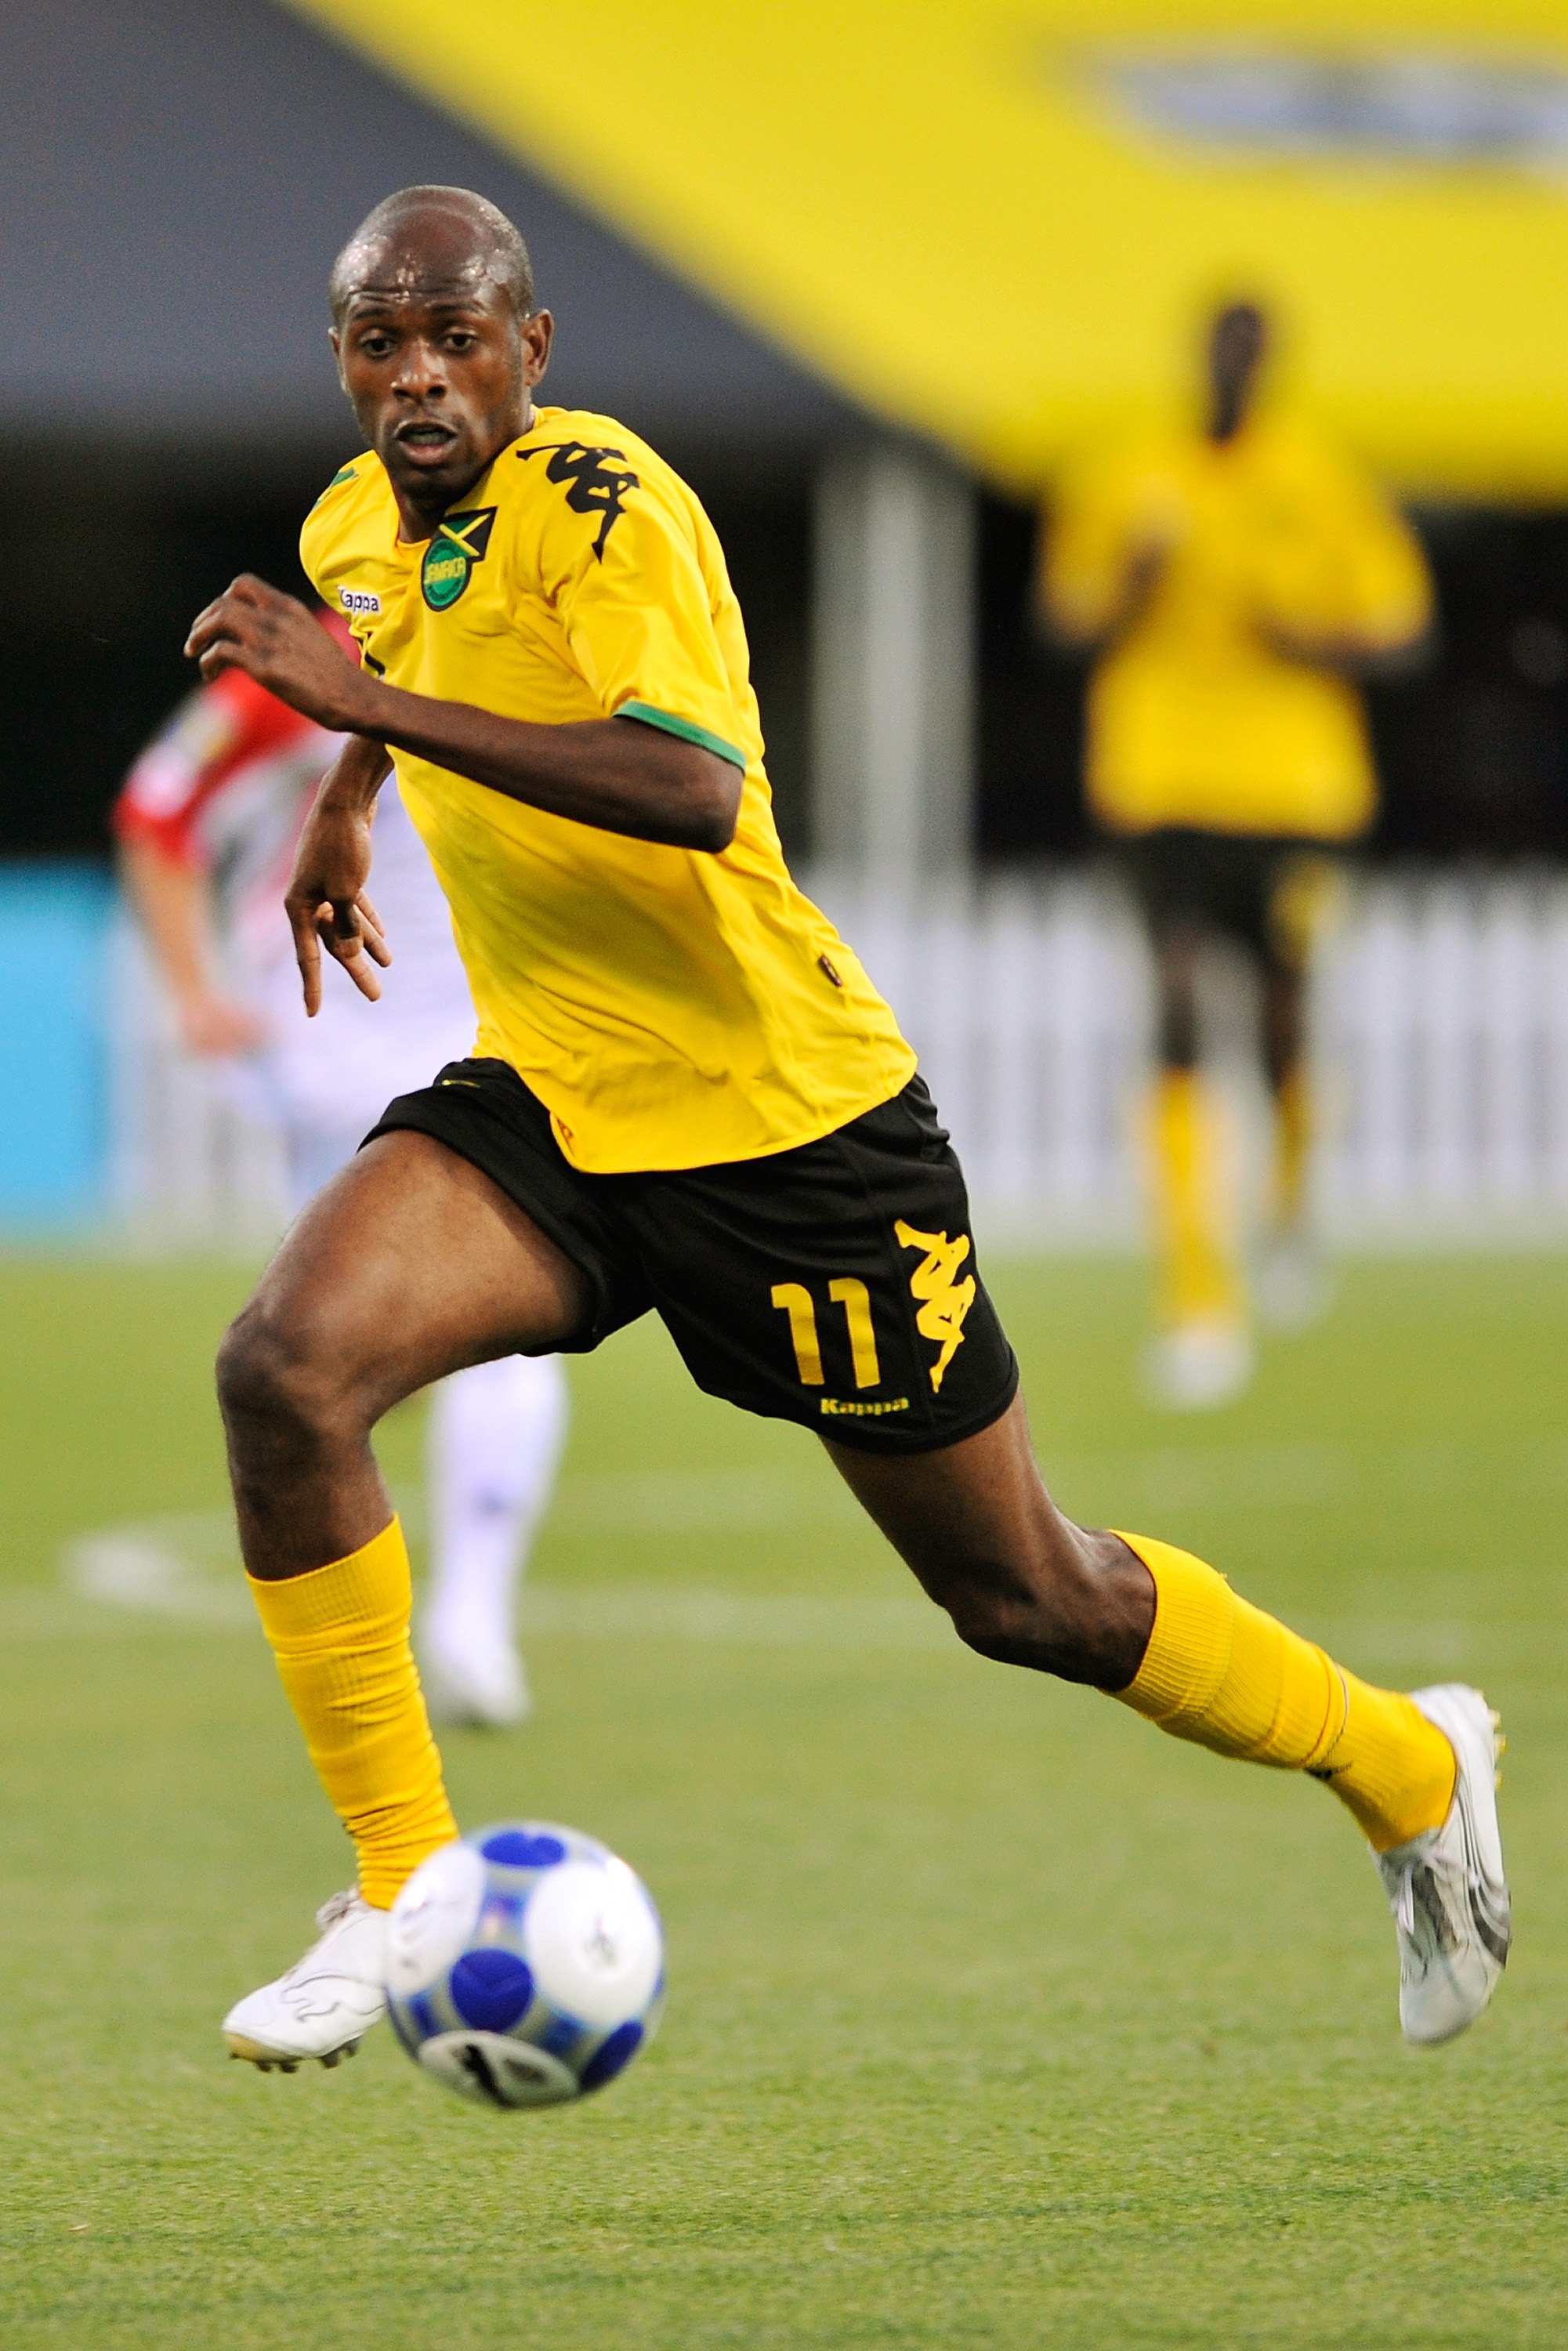 COLUMBUS, OH - JULY 07:  Luton Shelton #11 of Jamaica controls the ball against Costa Rica in a CONCACAF Gold Cup match at Crew Stadium on July 7, 2009 in Columbus, Ohio.  (Photo by Jamie Sabau/Getty Images)